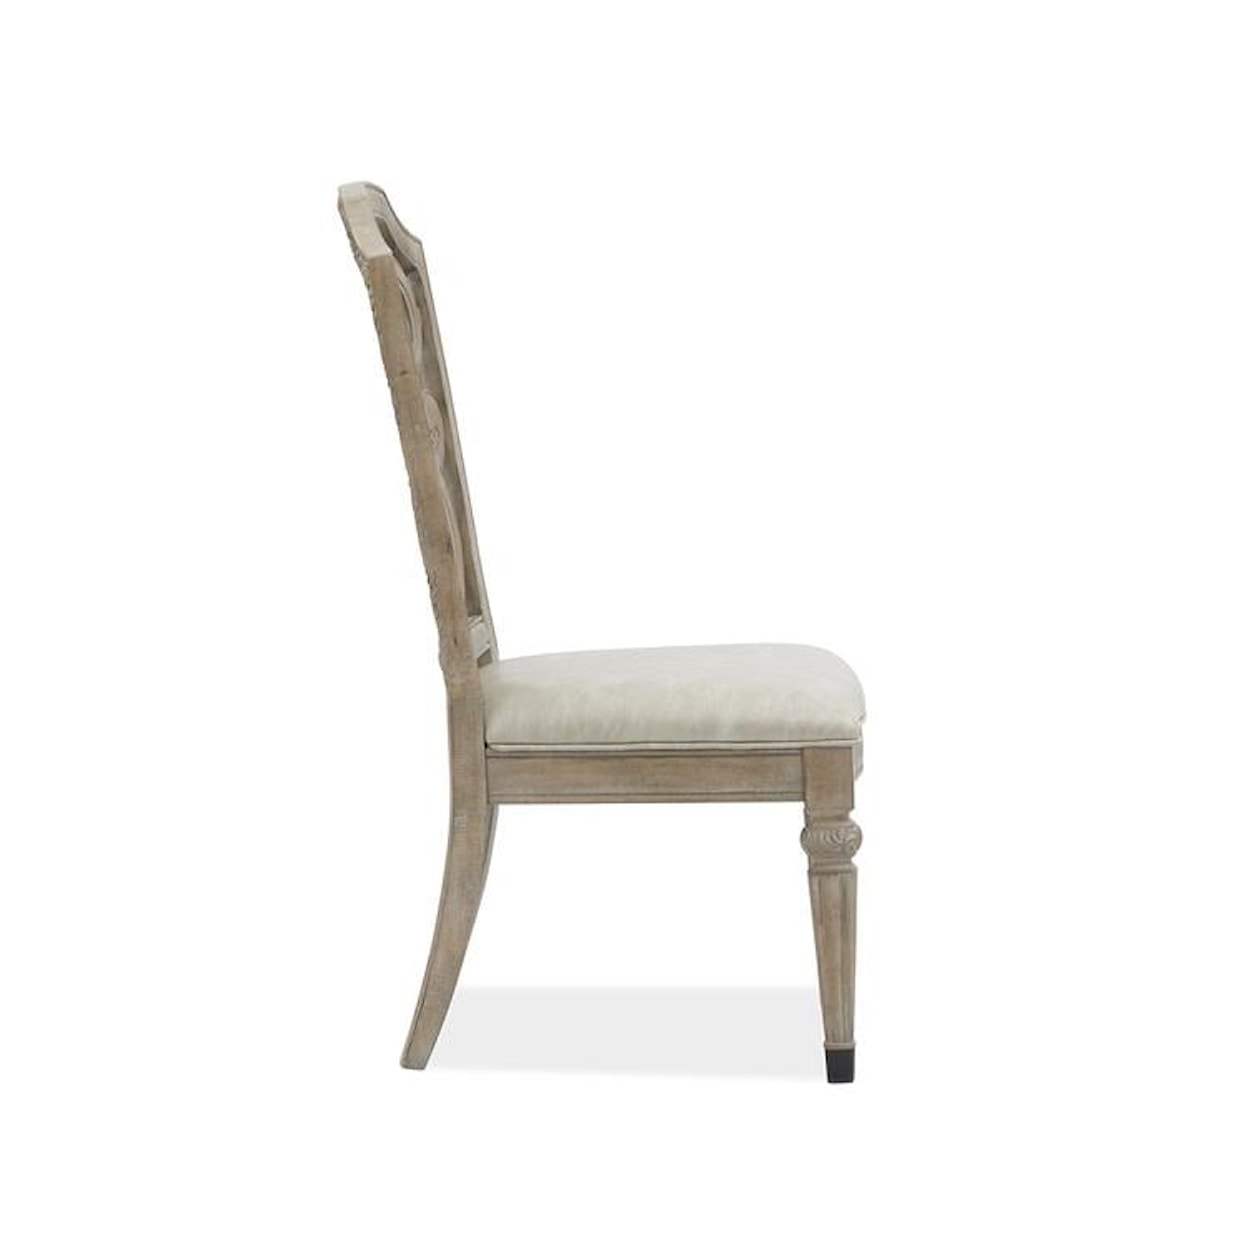 Magnussen Home Marisol Dining Dining Side Chair 